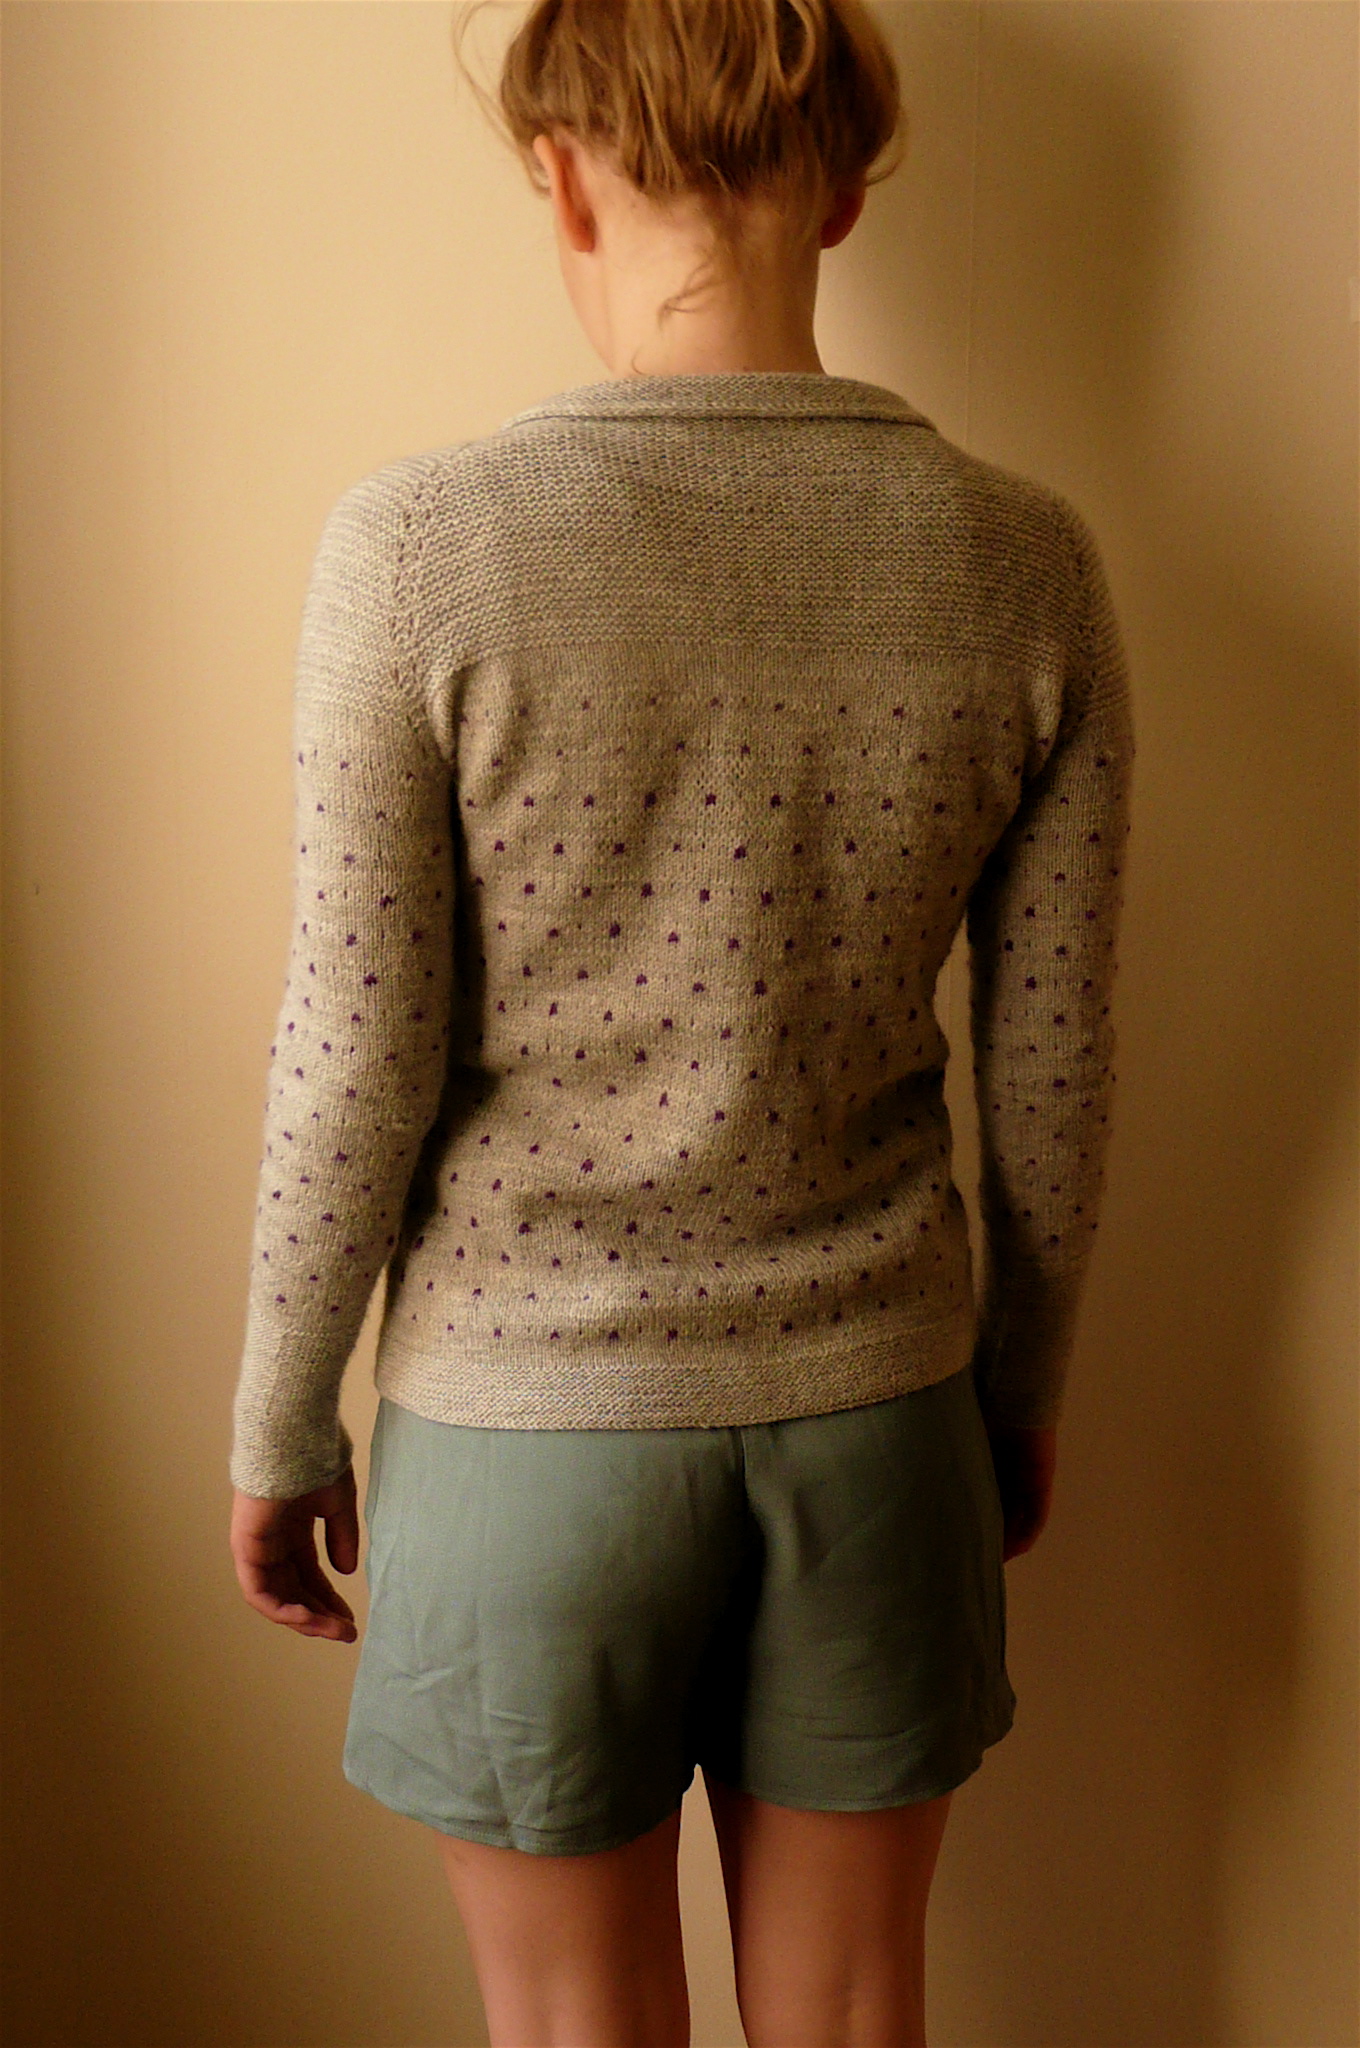 the back view of a woman's short wearing a sweater